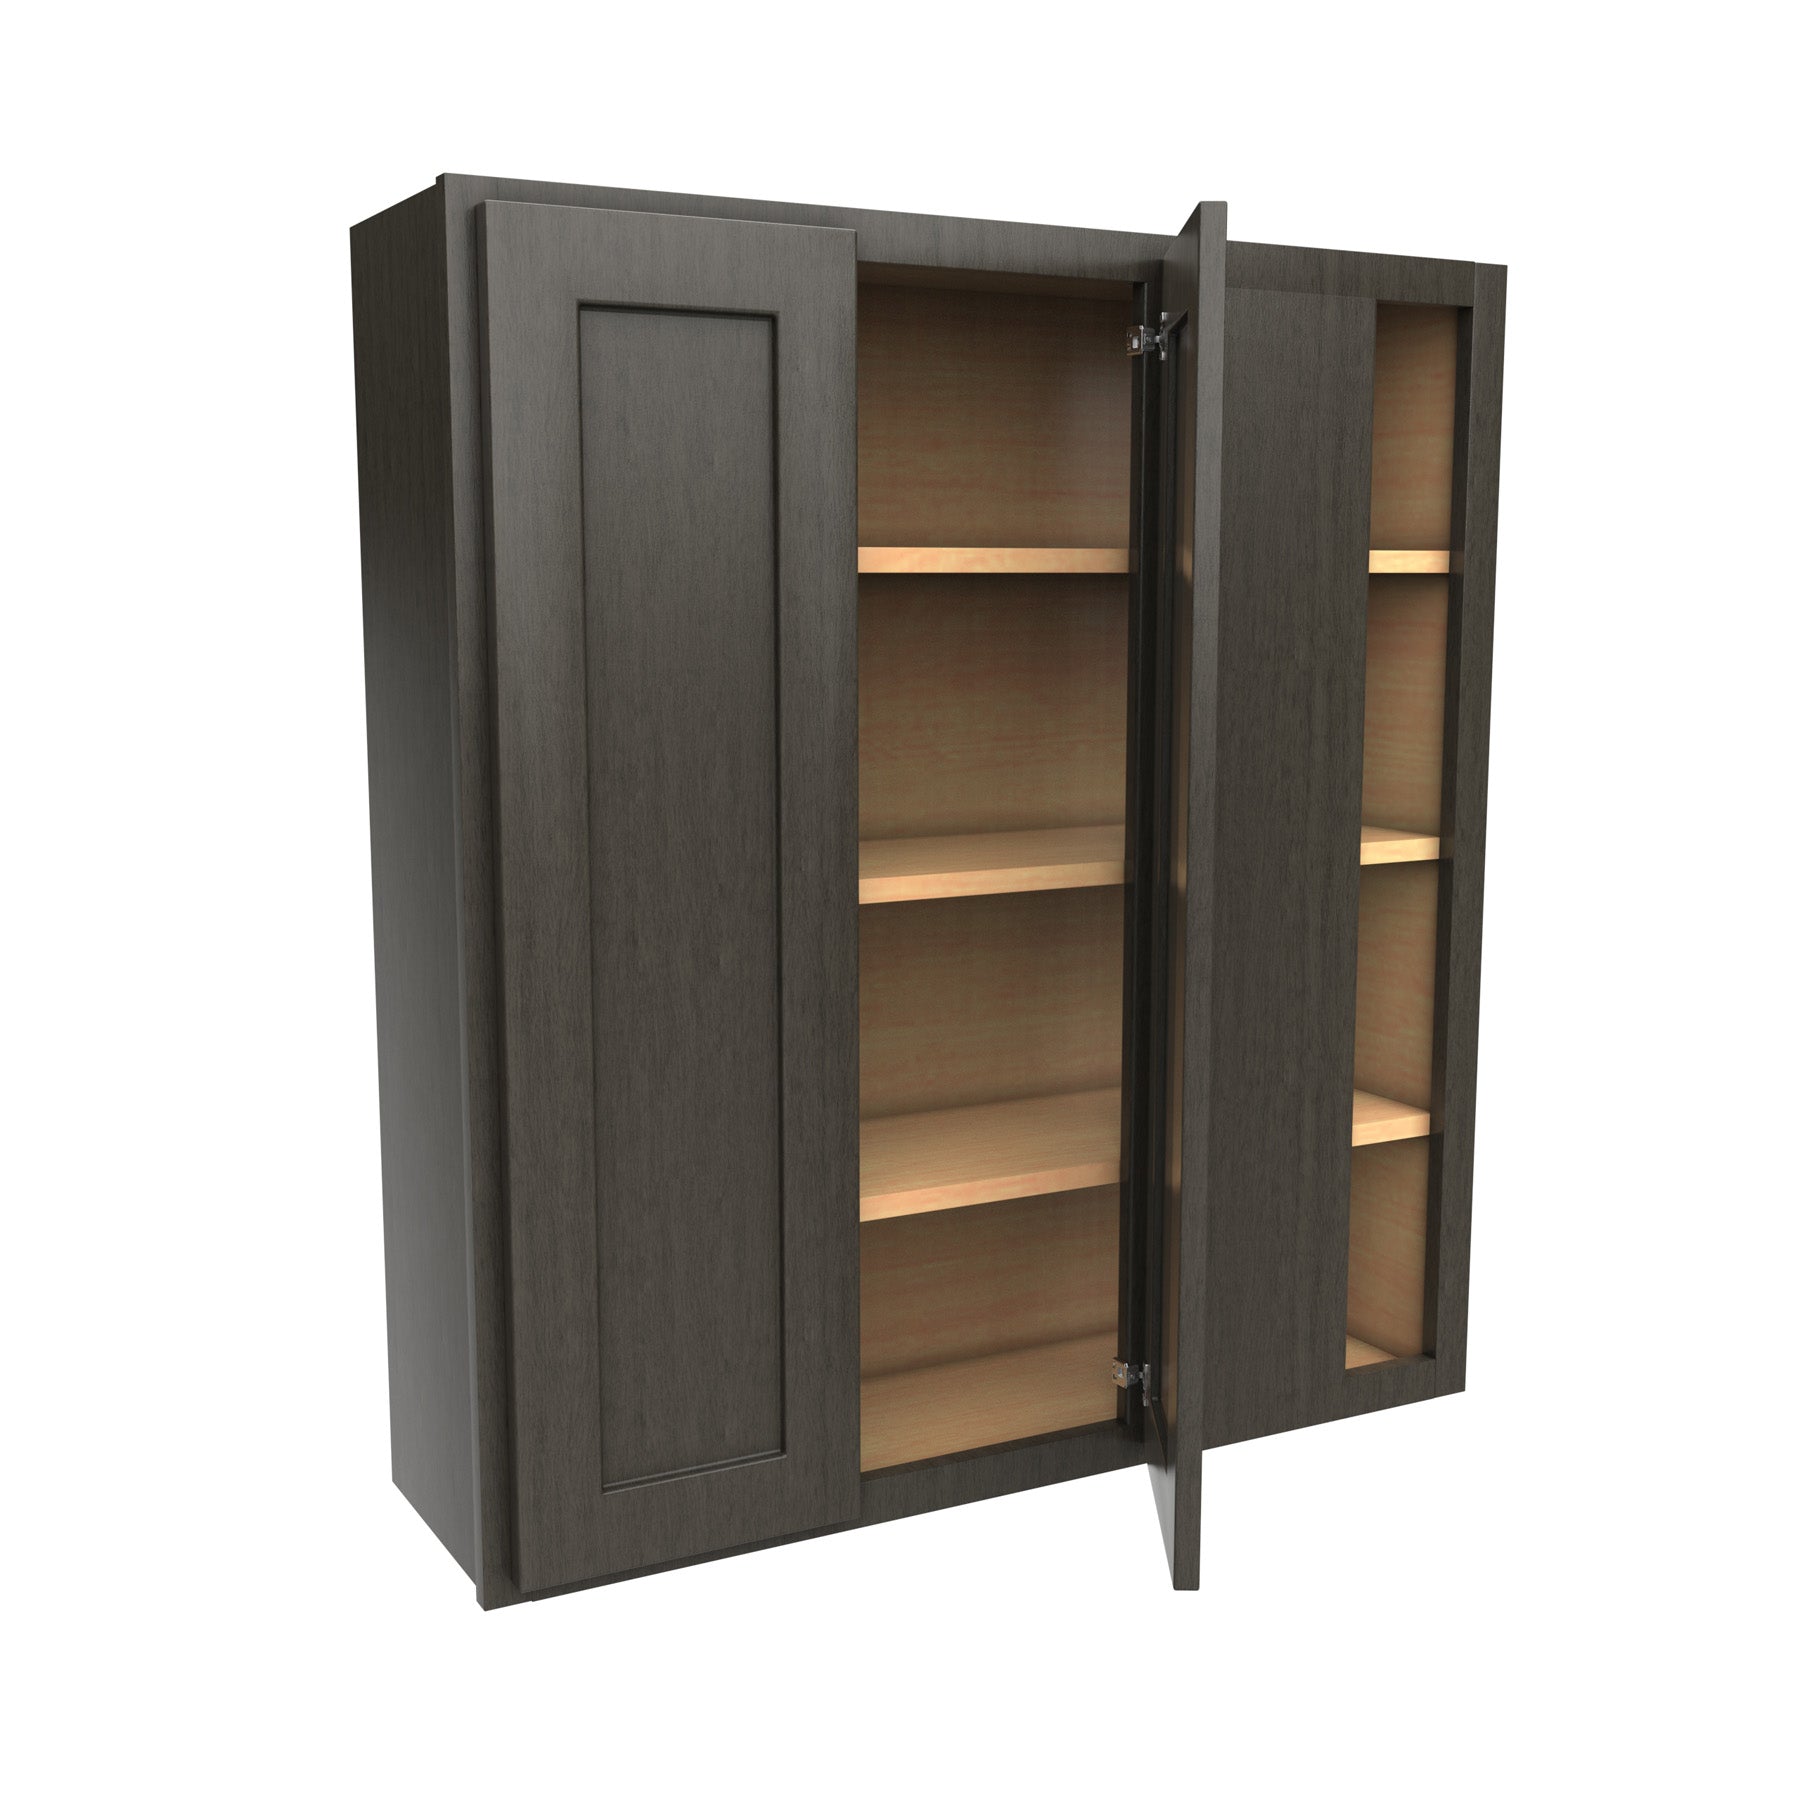 Luxor Smoky Grey - Blind Wall Cabinet | 39"W x 42"H x 12"D